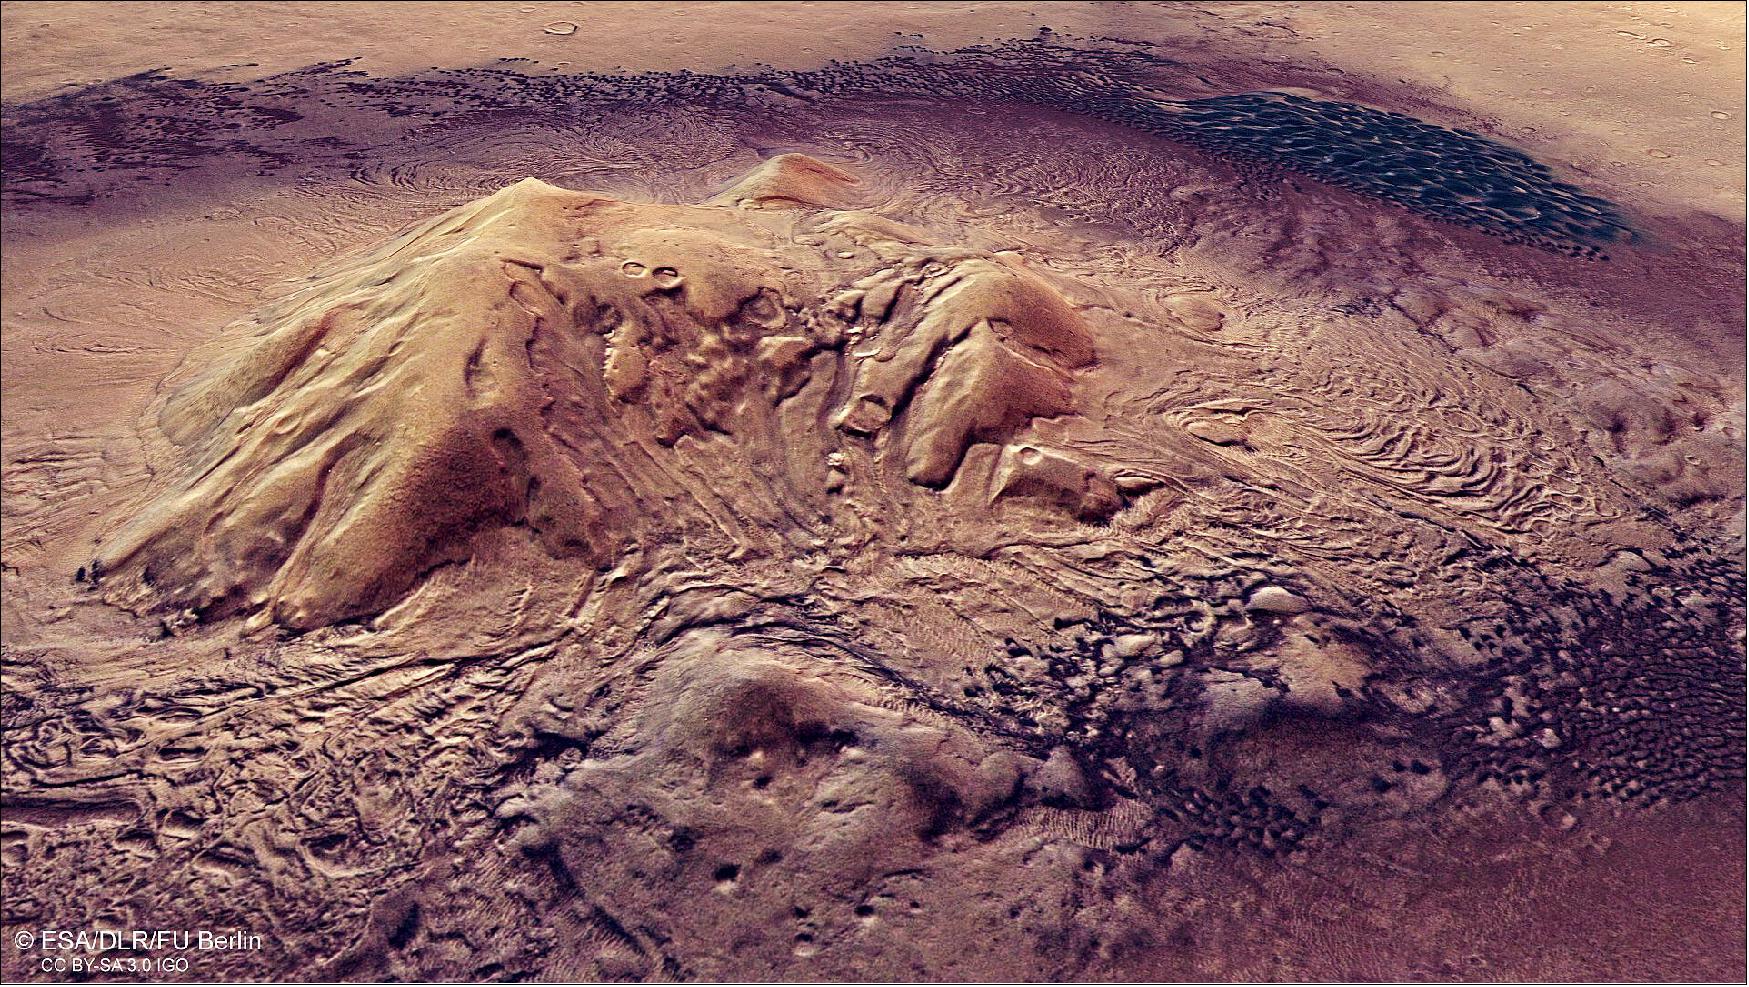 Figure 98: Perspective view of the Moreux crater on Mars observed on 30 October 2019 during orbit 20014 (image credit: ESA/DLR/FU Berlin, CC BY-SA 3.0 IGO)